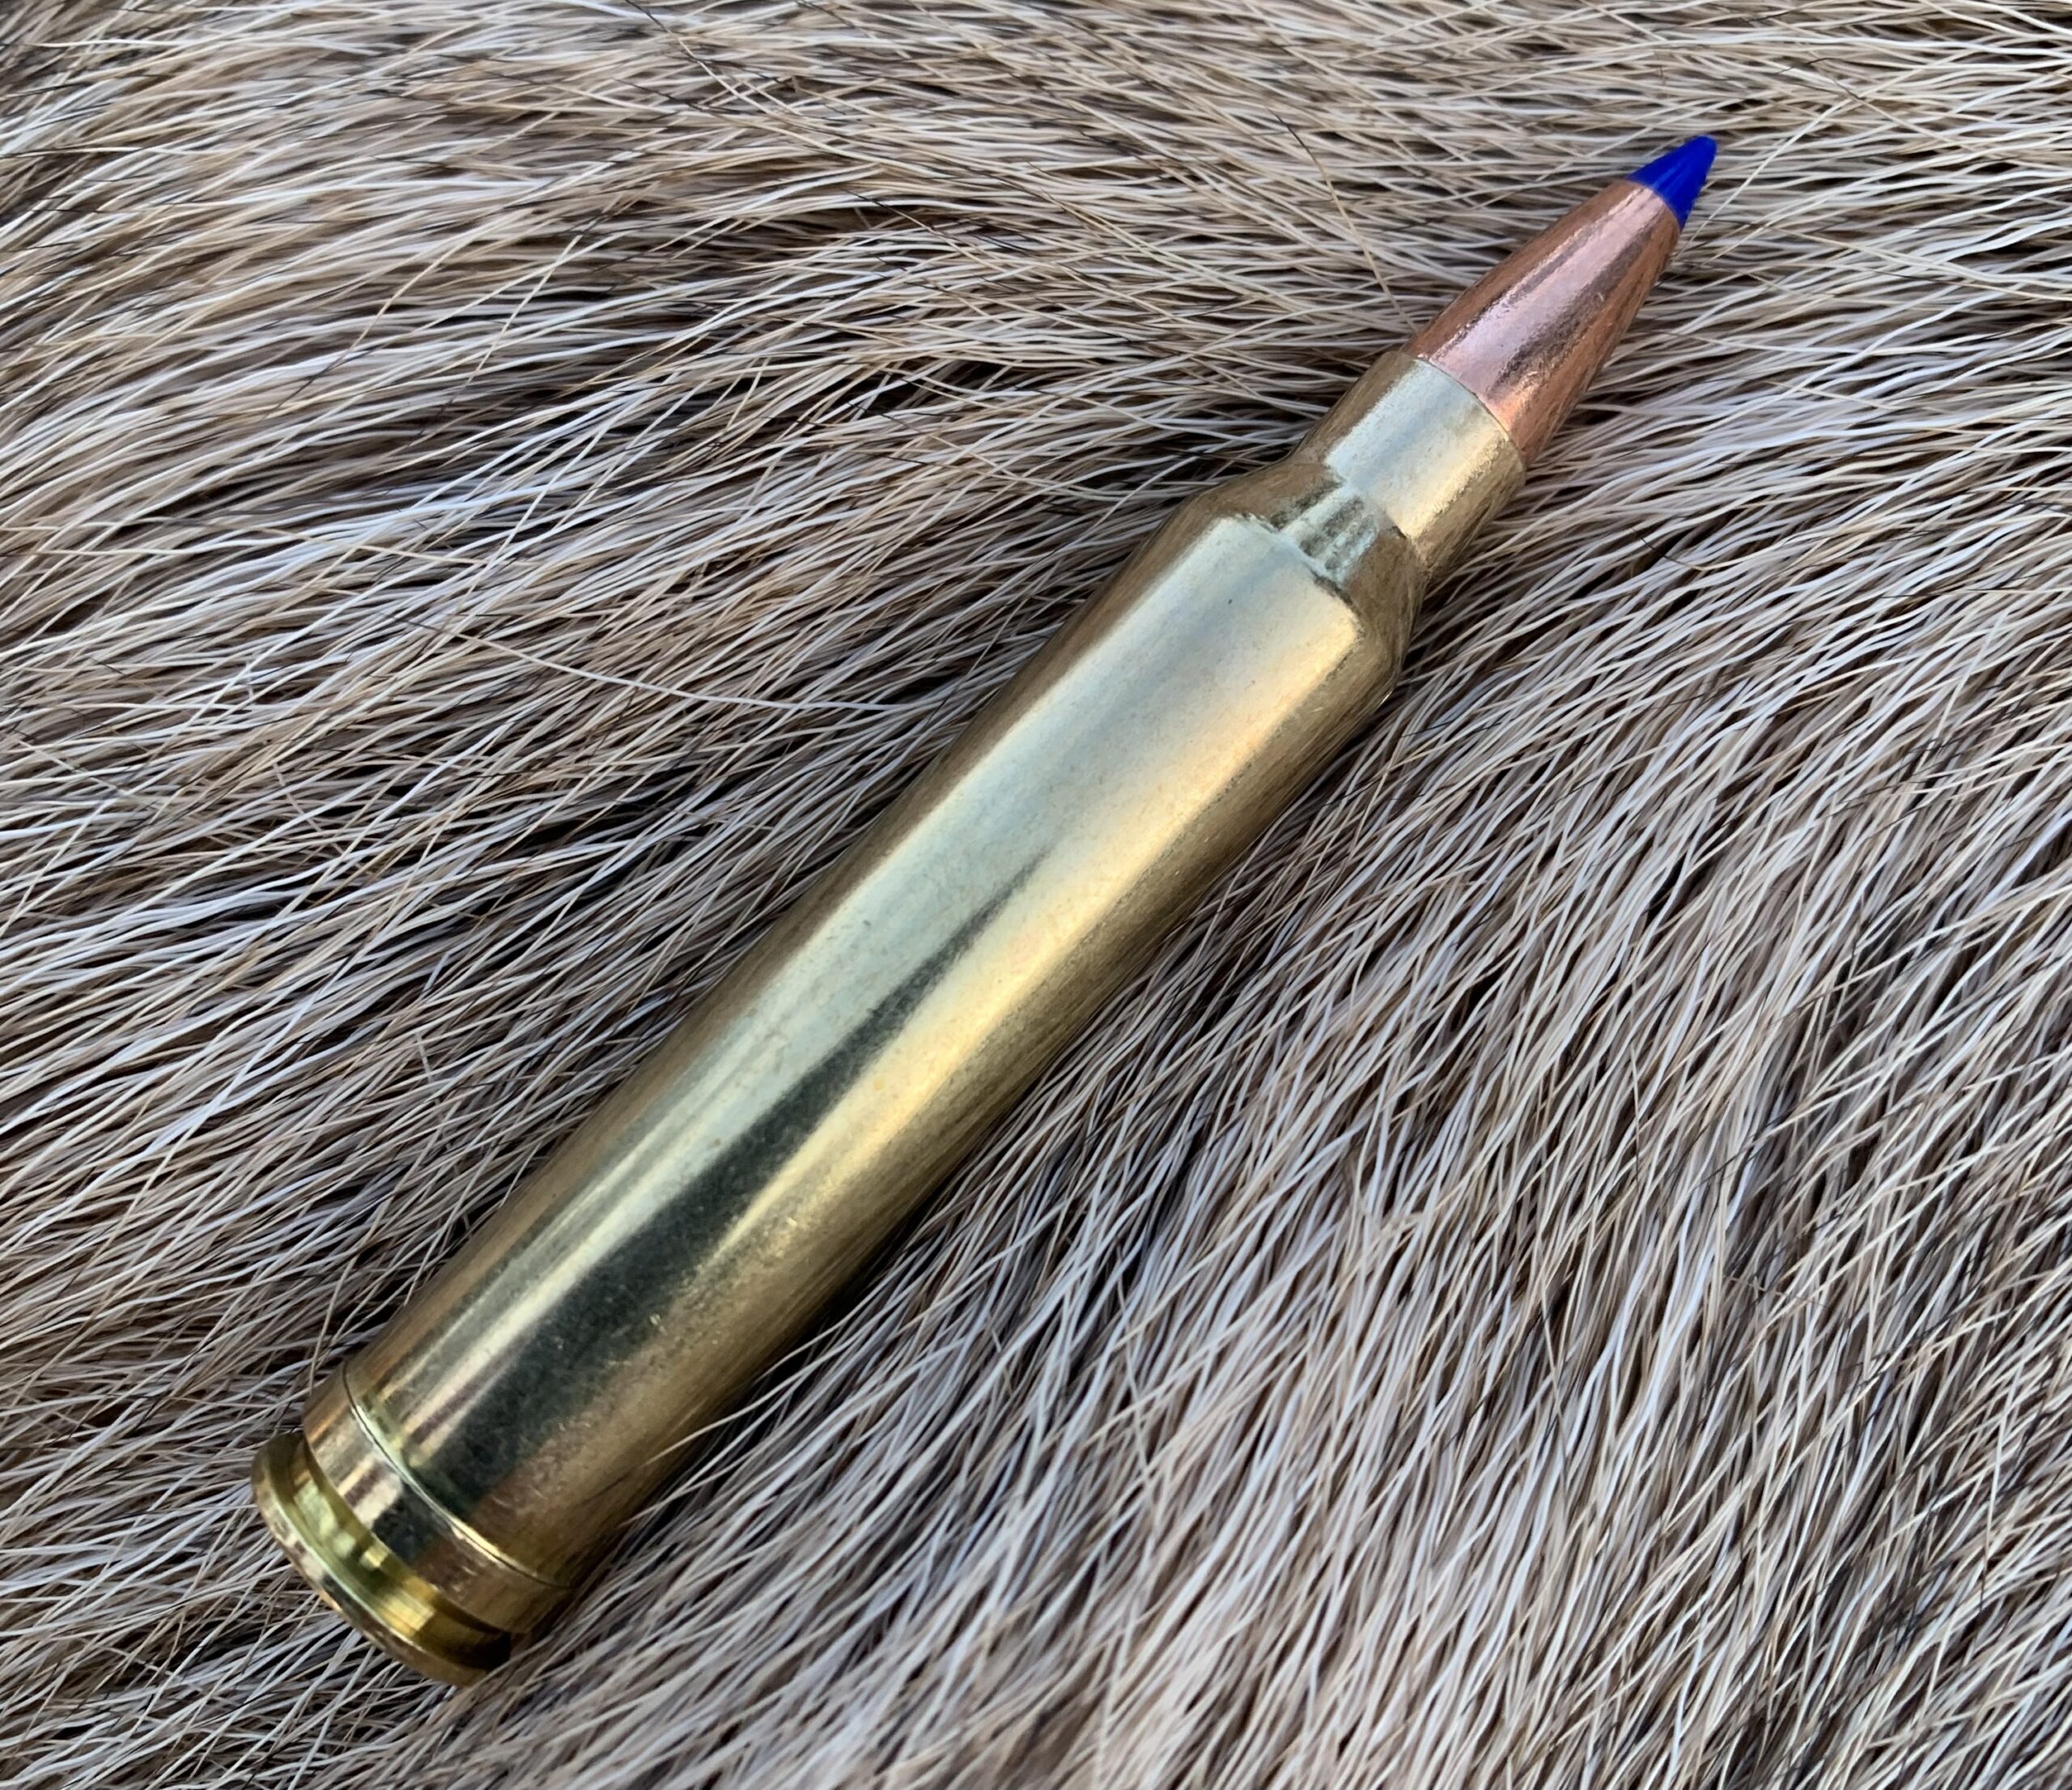 .300 Win. Mag. with Barnes TTSX bullet